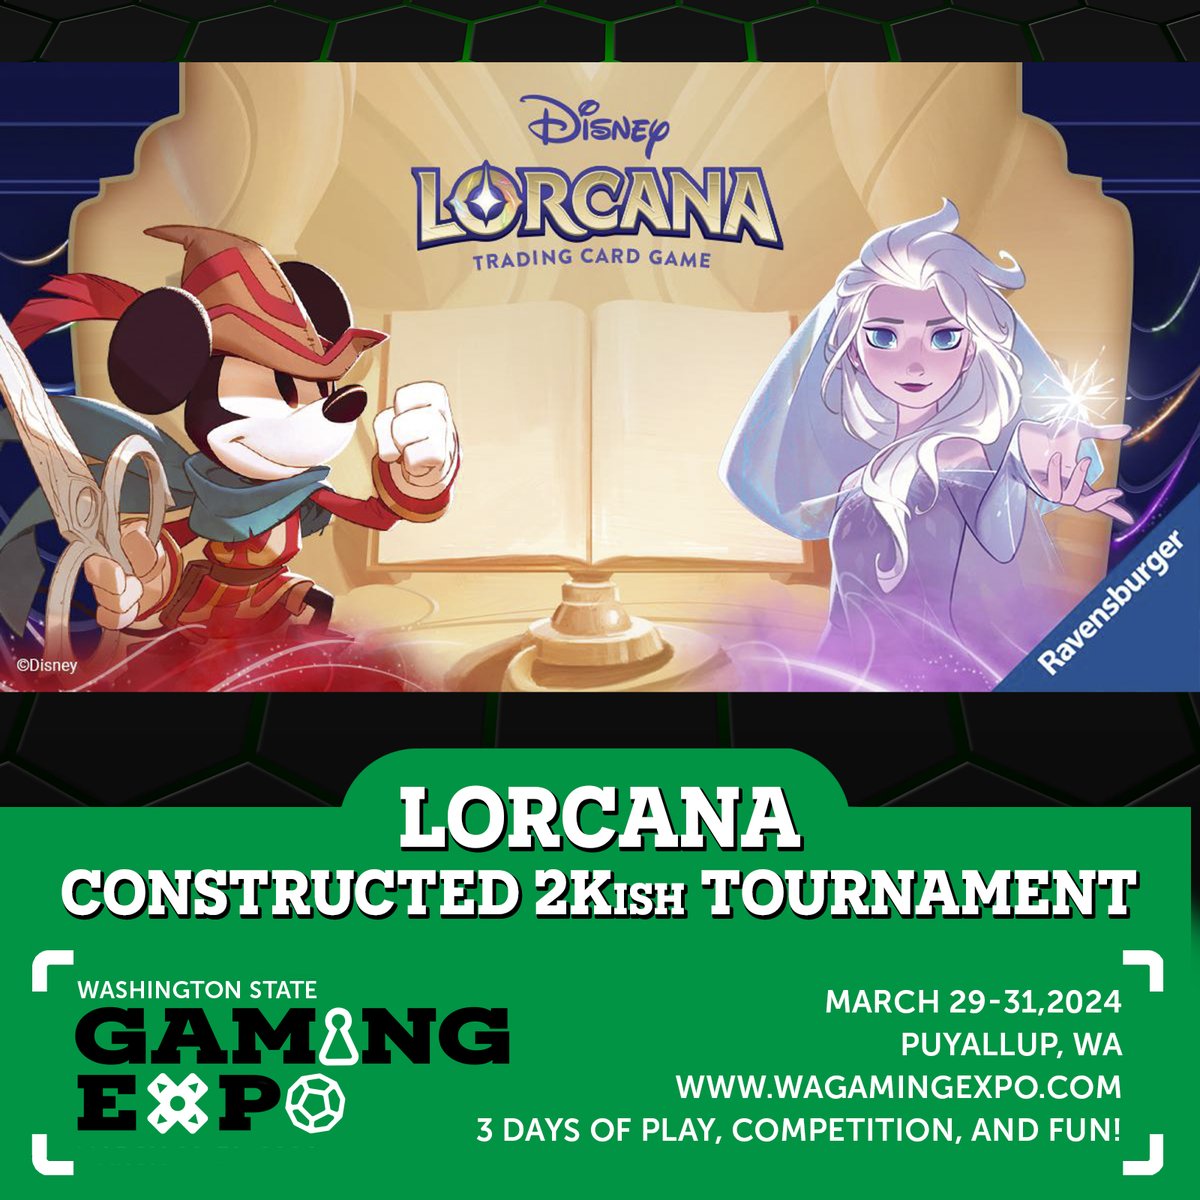 Washington Gaming Expo is hosting an official CATAN United States National Championship Qualifier Tournament and a Disney Lorcana Constructed 2Kish Tournament! Click on the links below for more information: catan.bestcoastpairings.com/event/TAXJ38HF… Lorcana Register Here: melee.gg/Tournament/Vie…